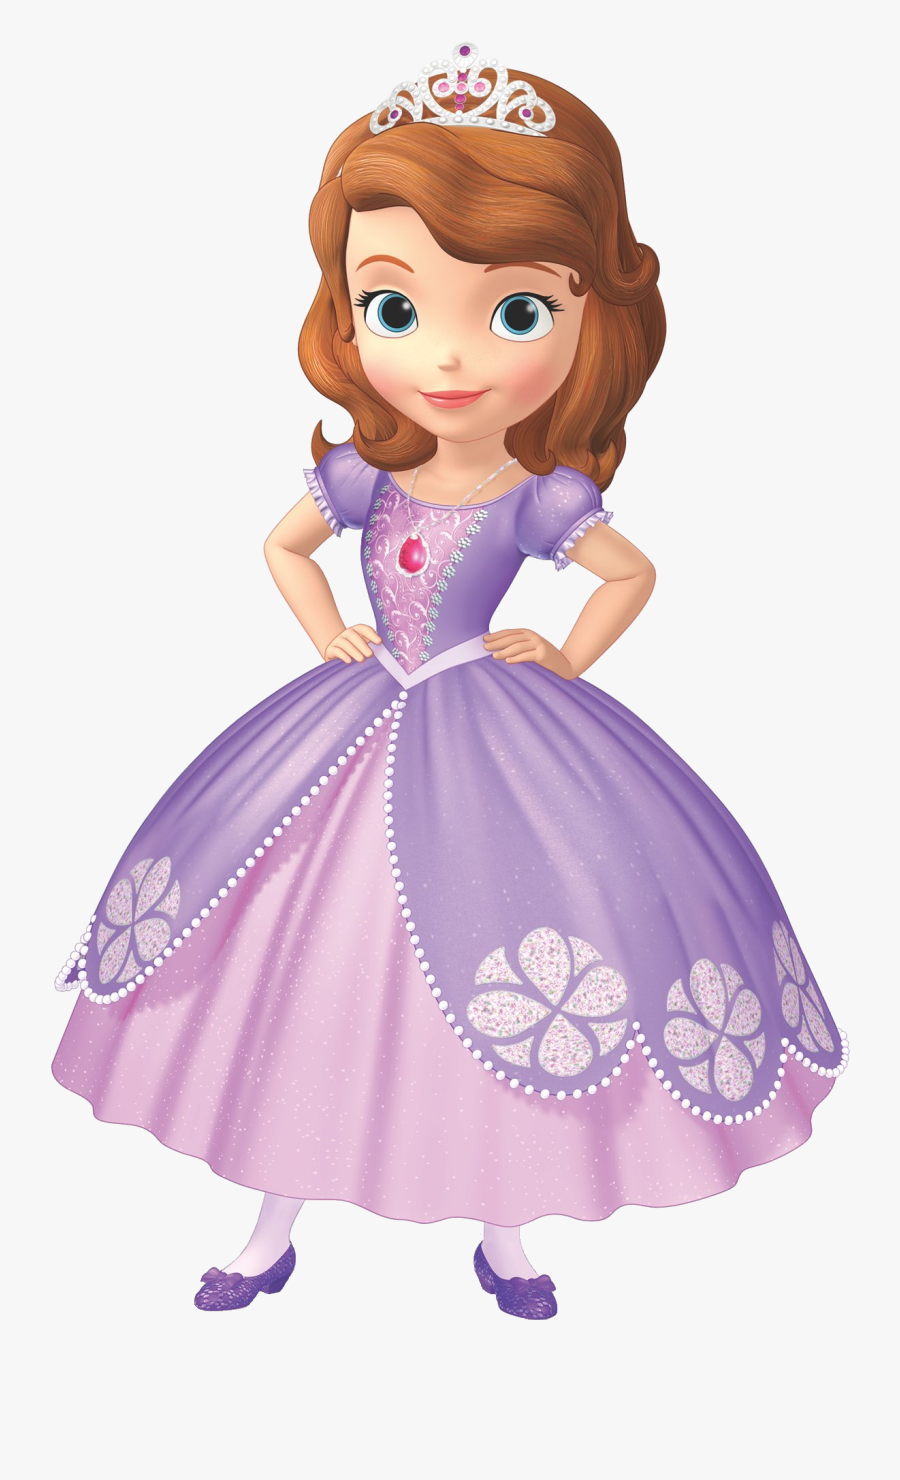 Sofia The First Images - Transparent Sofia The First Png, Transparent Clipart